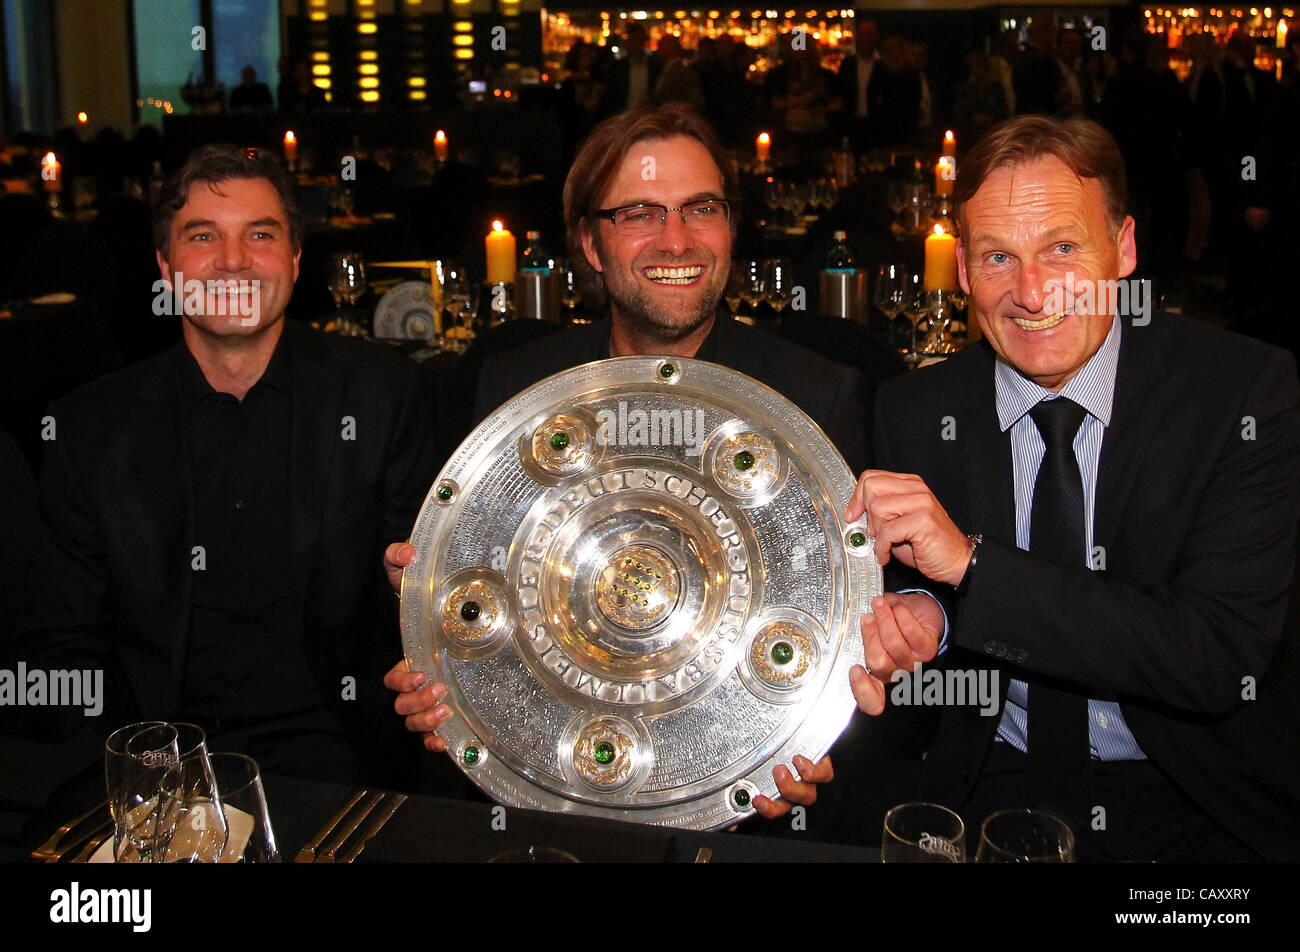 DORTMUND, GERMANY - MAY 05:  (L-R) Michael Zorc, manager of Dortmund, Juergen Klopp, head coach of Dortmund and managing director Hans Joachim Watzke pose with the trophy at View restaurant on May 5, 2012 in Dortmund, Germany *** Local Caption *** Michael Zorc; Juergen Klopp; Hans Joachim Watzke Stock Photo